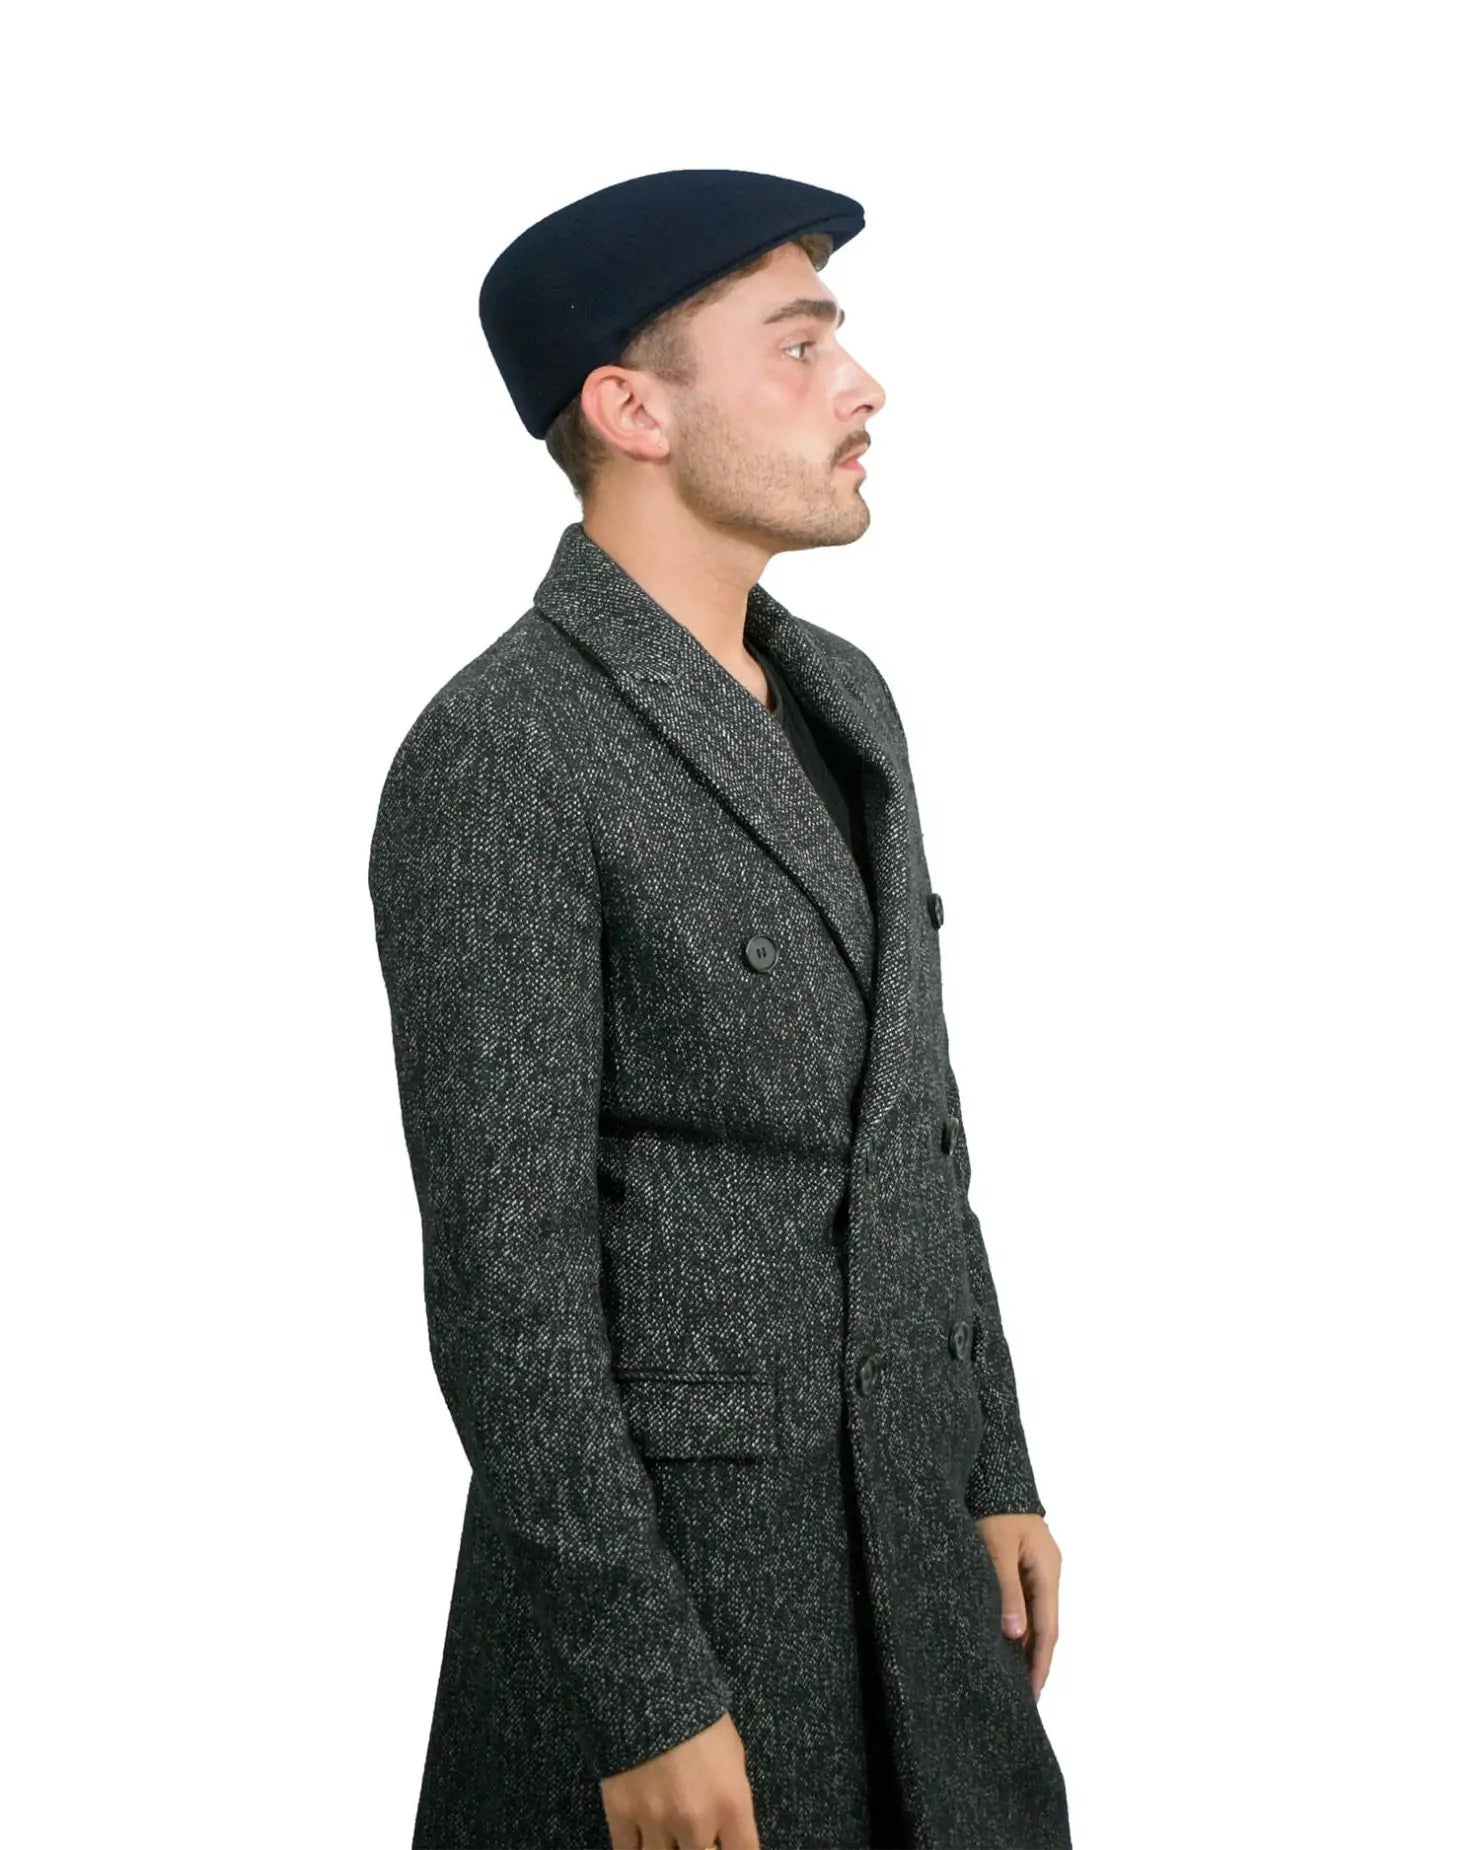 A man wearing a black coat and hat, featuring Men’s Traditional Paperboy Flat Cap.